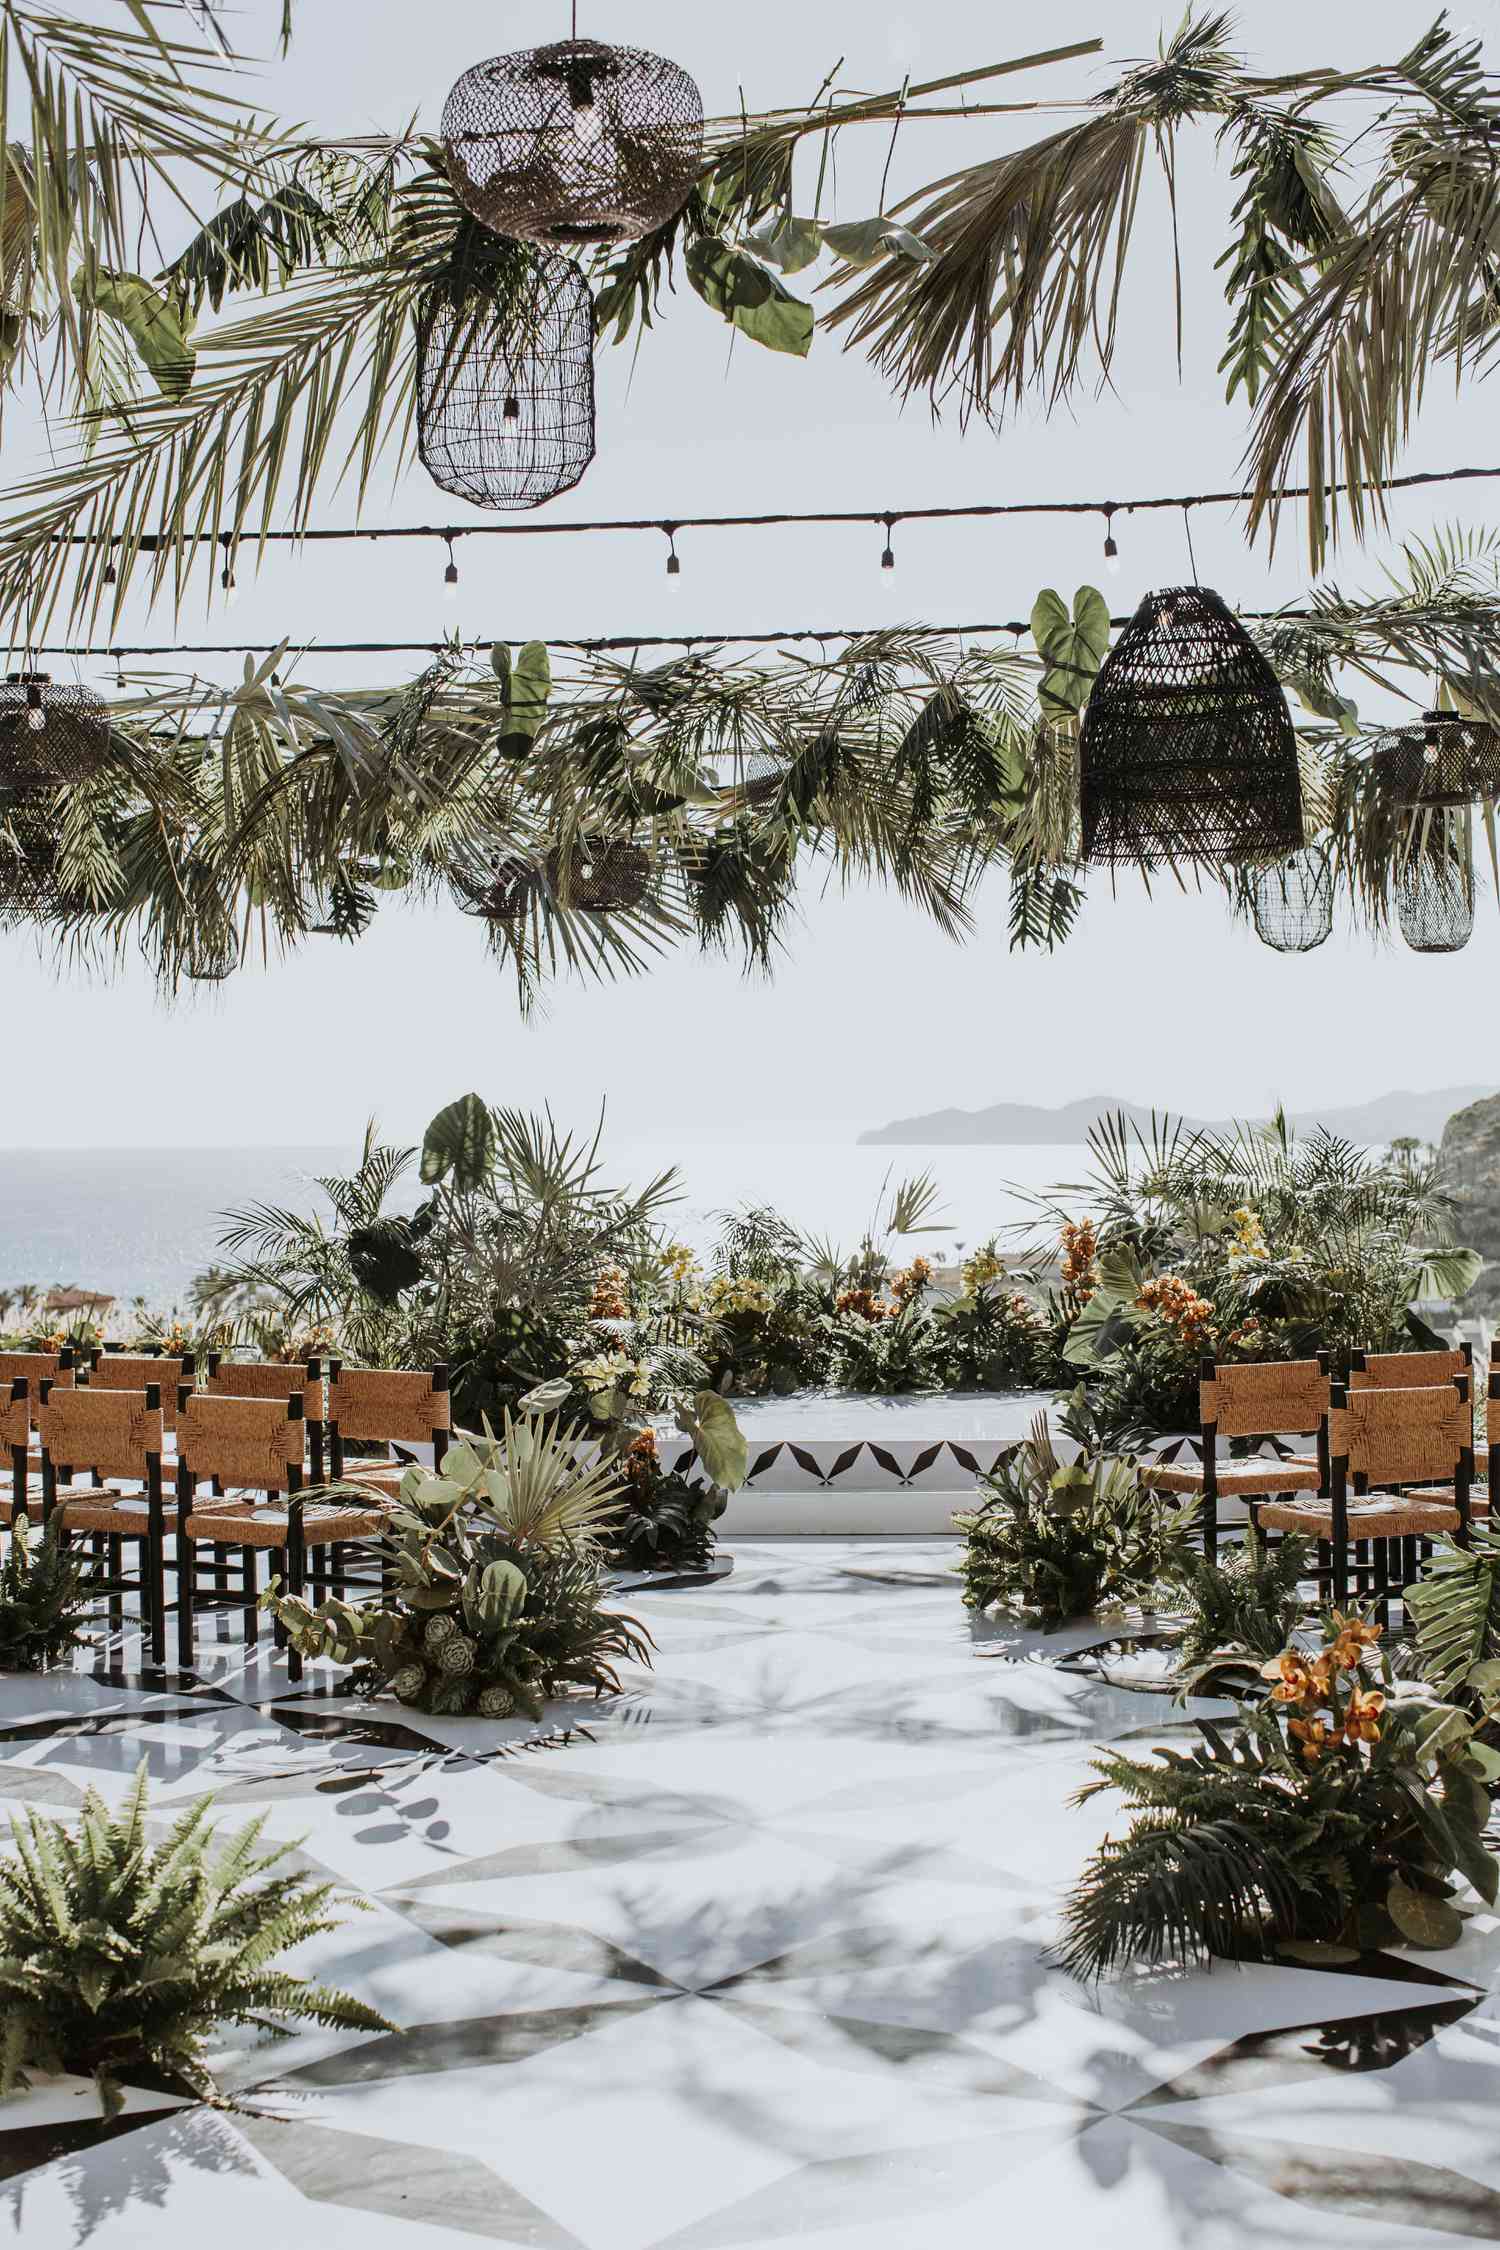 Ceremony Setting Decorated With Tropical Greenery and Black Rattan Lanterns Overlooking the Ocean